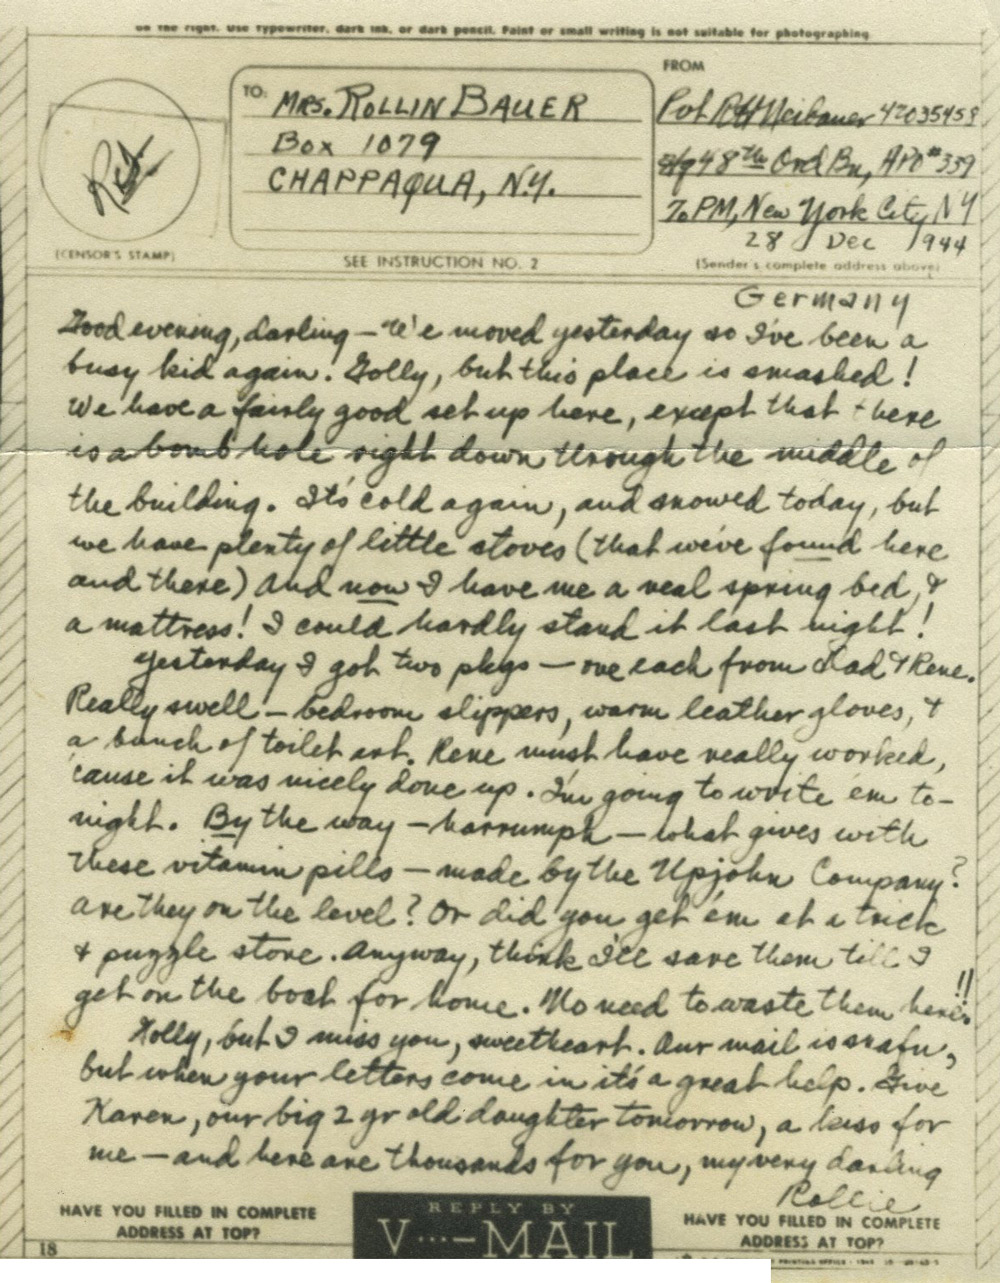 12-28-44-ww2-letters-mary-anne-erickson